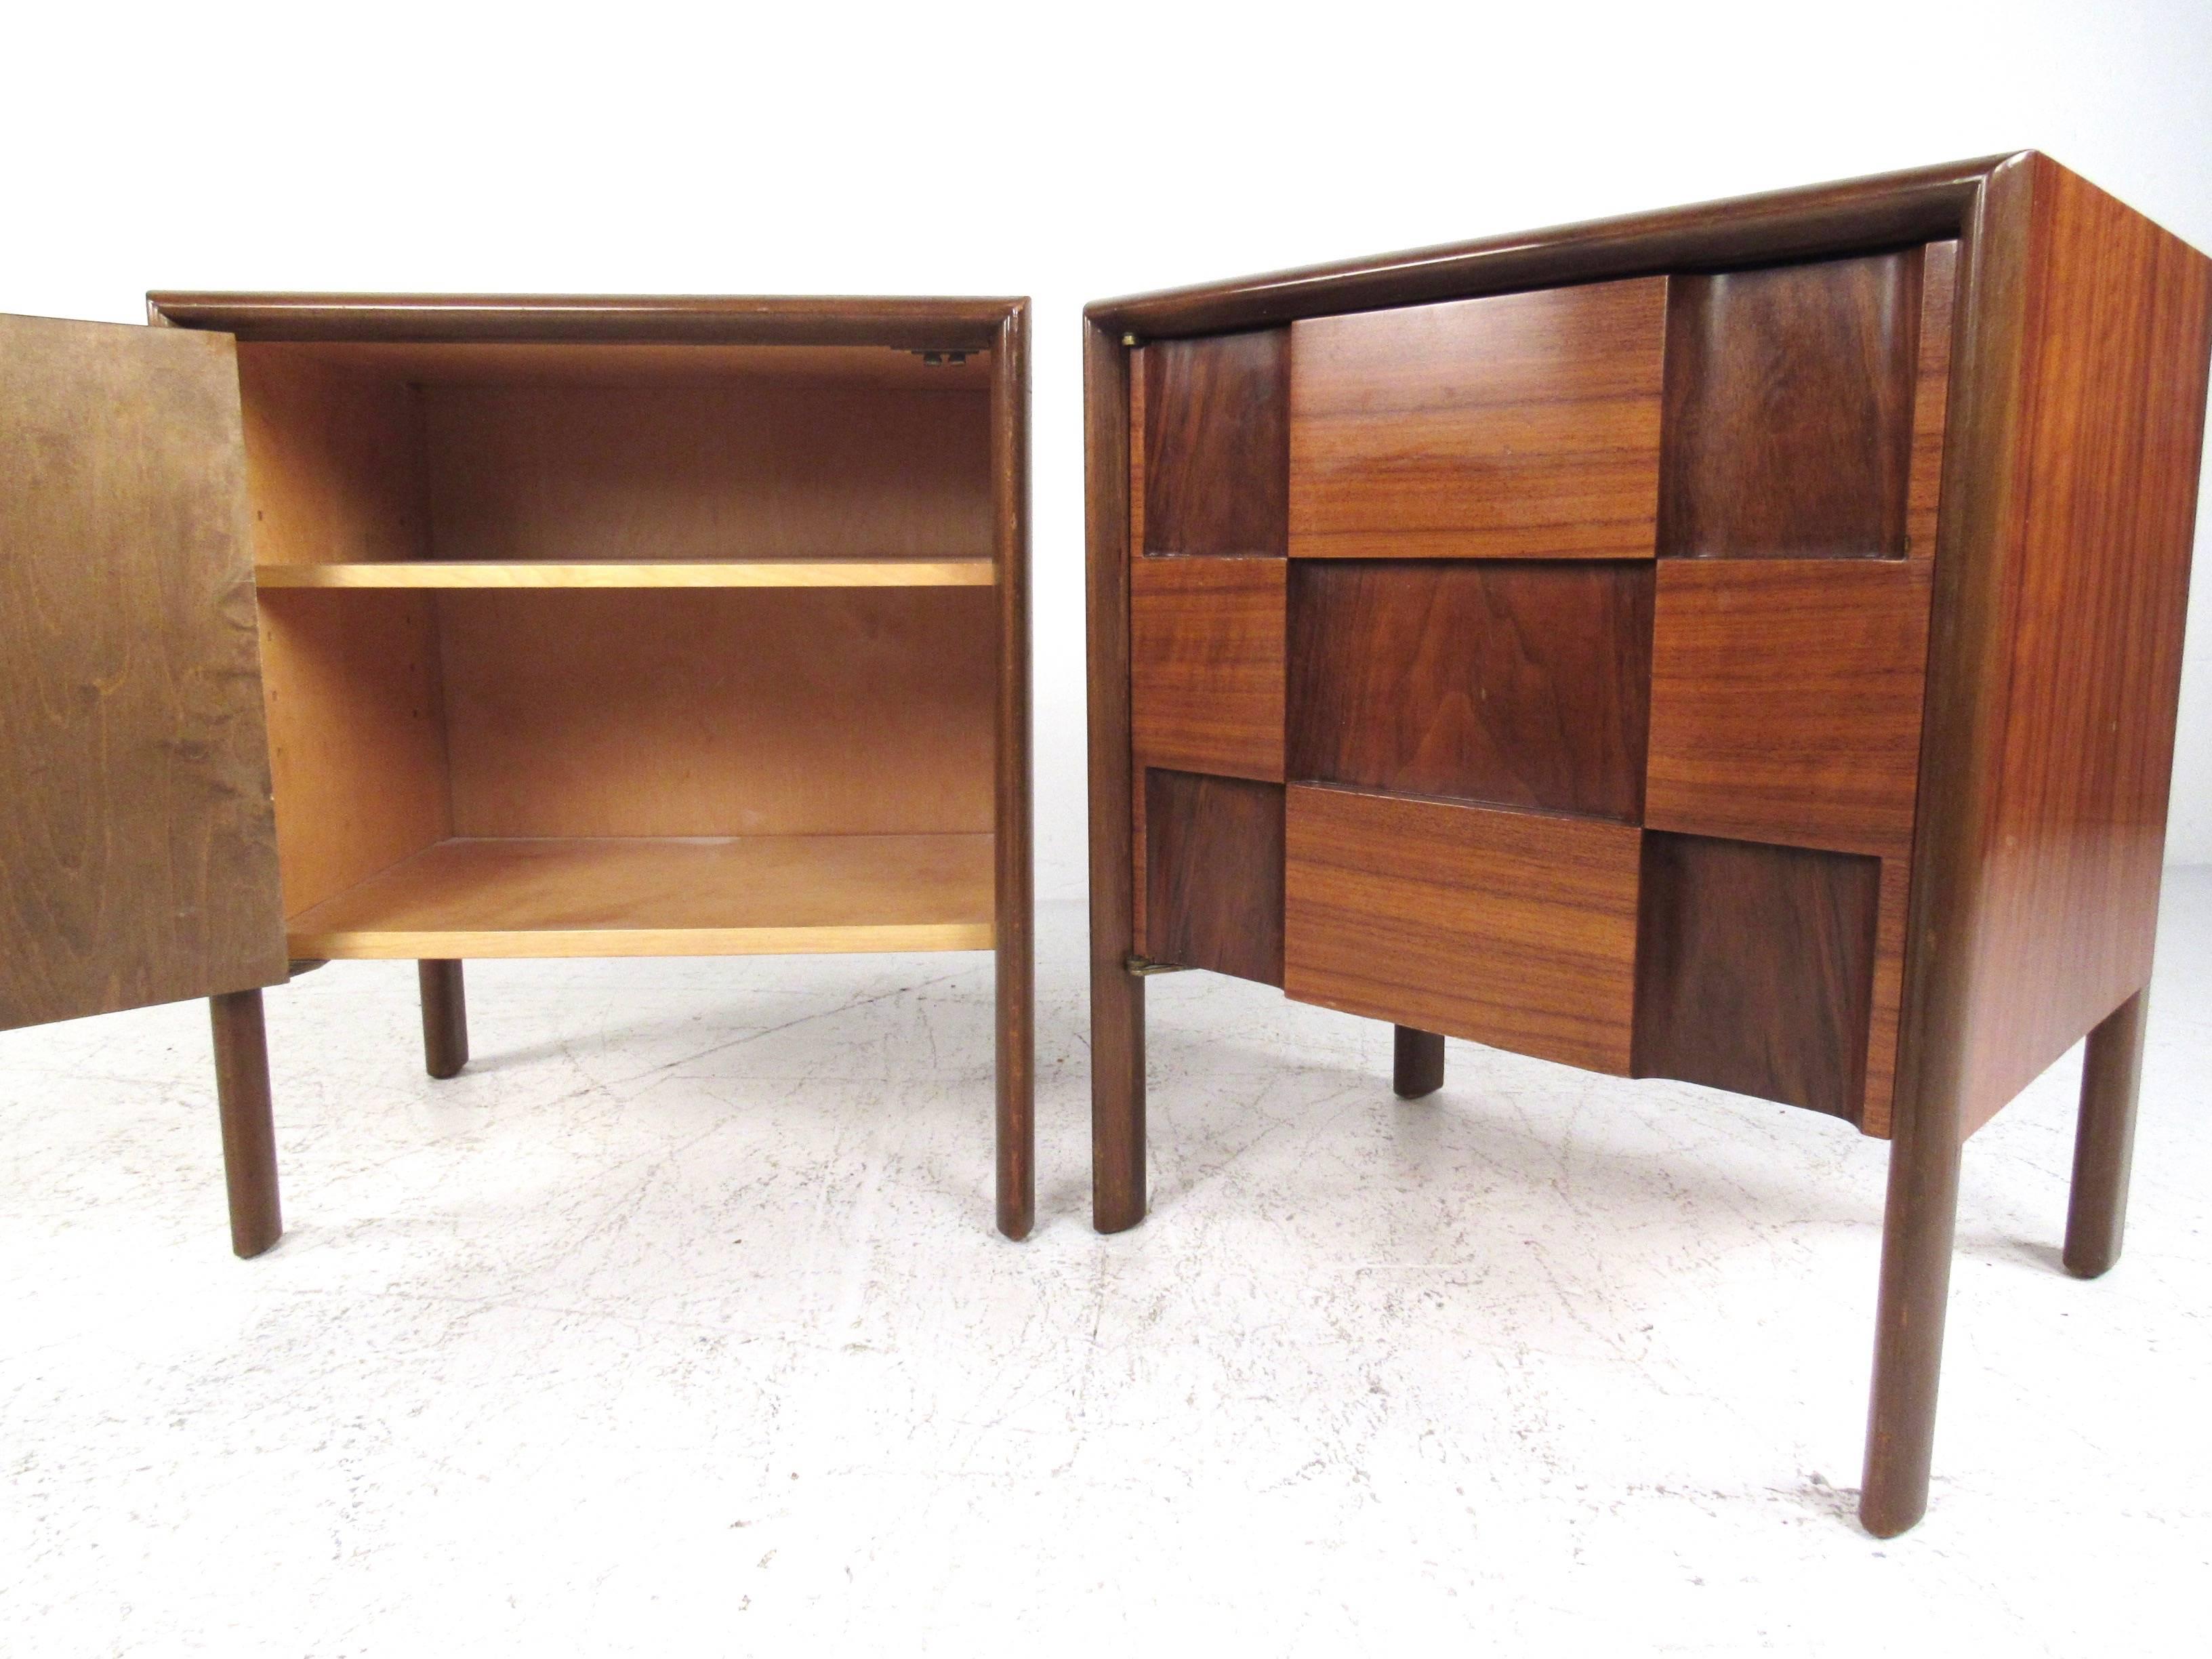 This stylish pair of Mid-Century end tables by Edmond Spence feature sculpted 